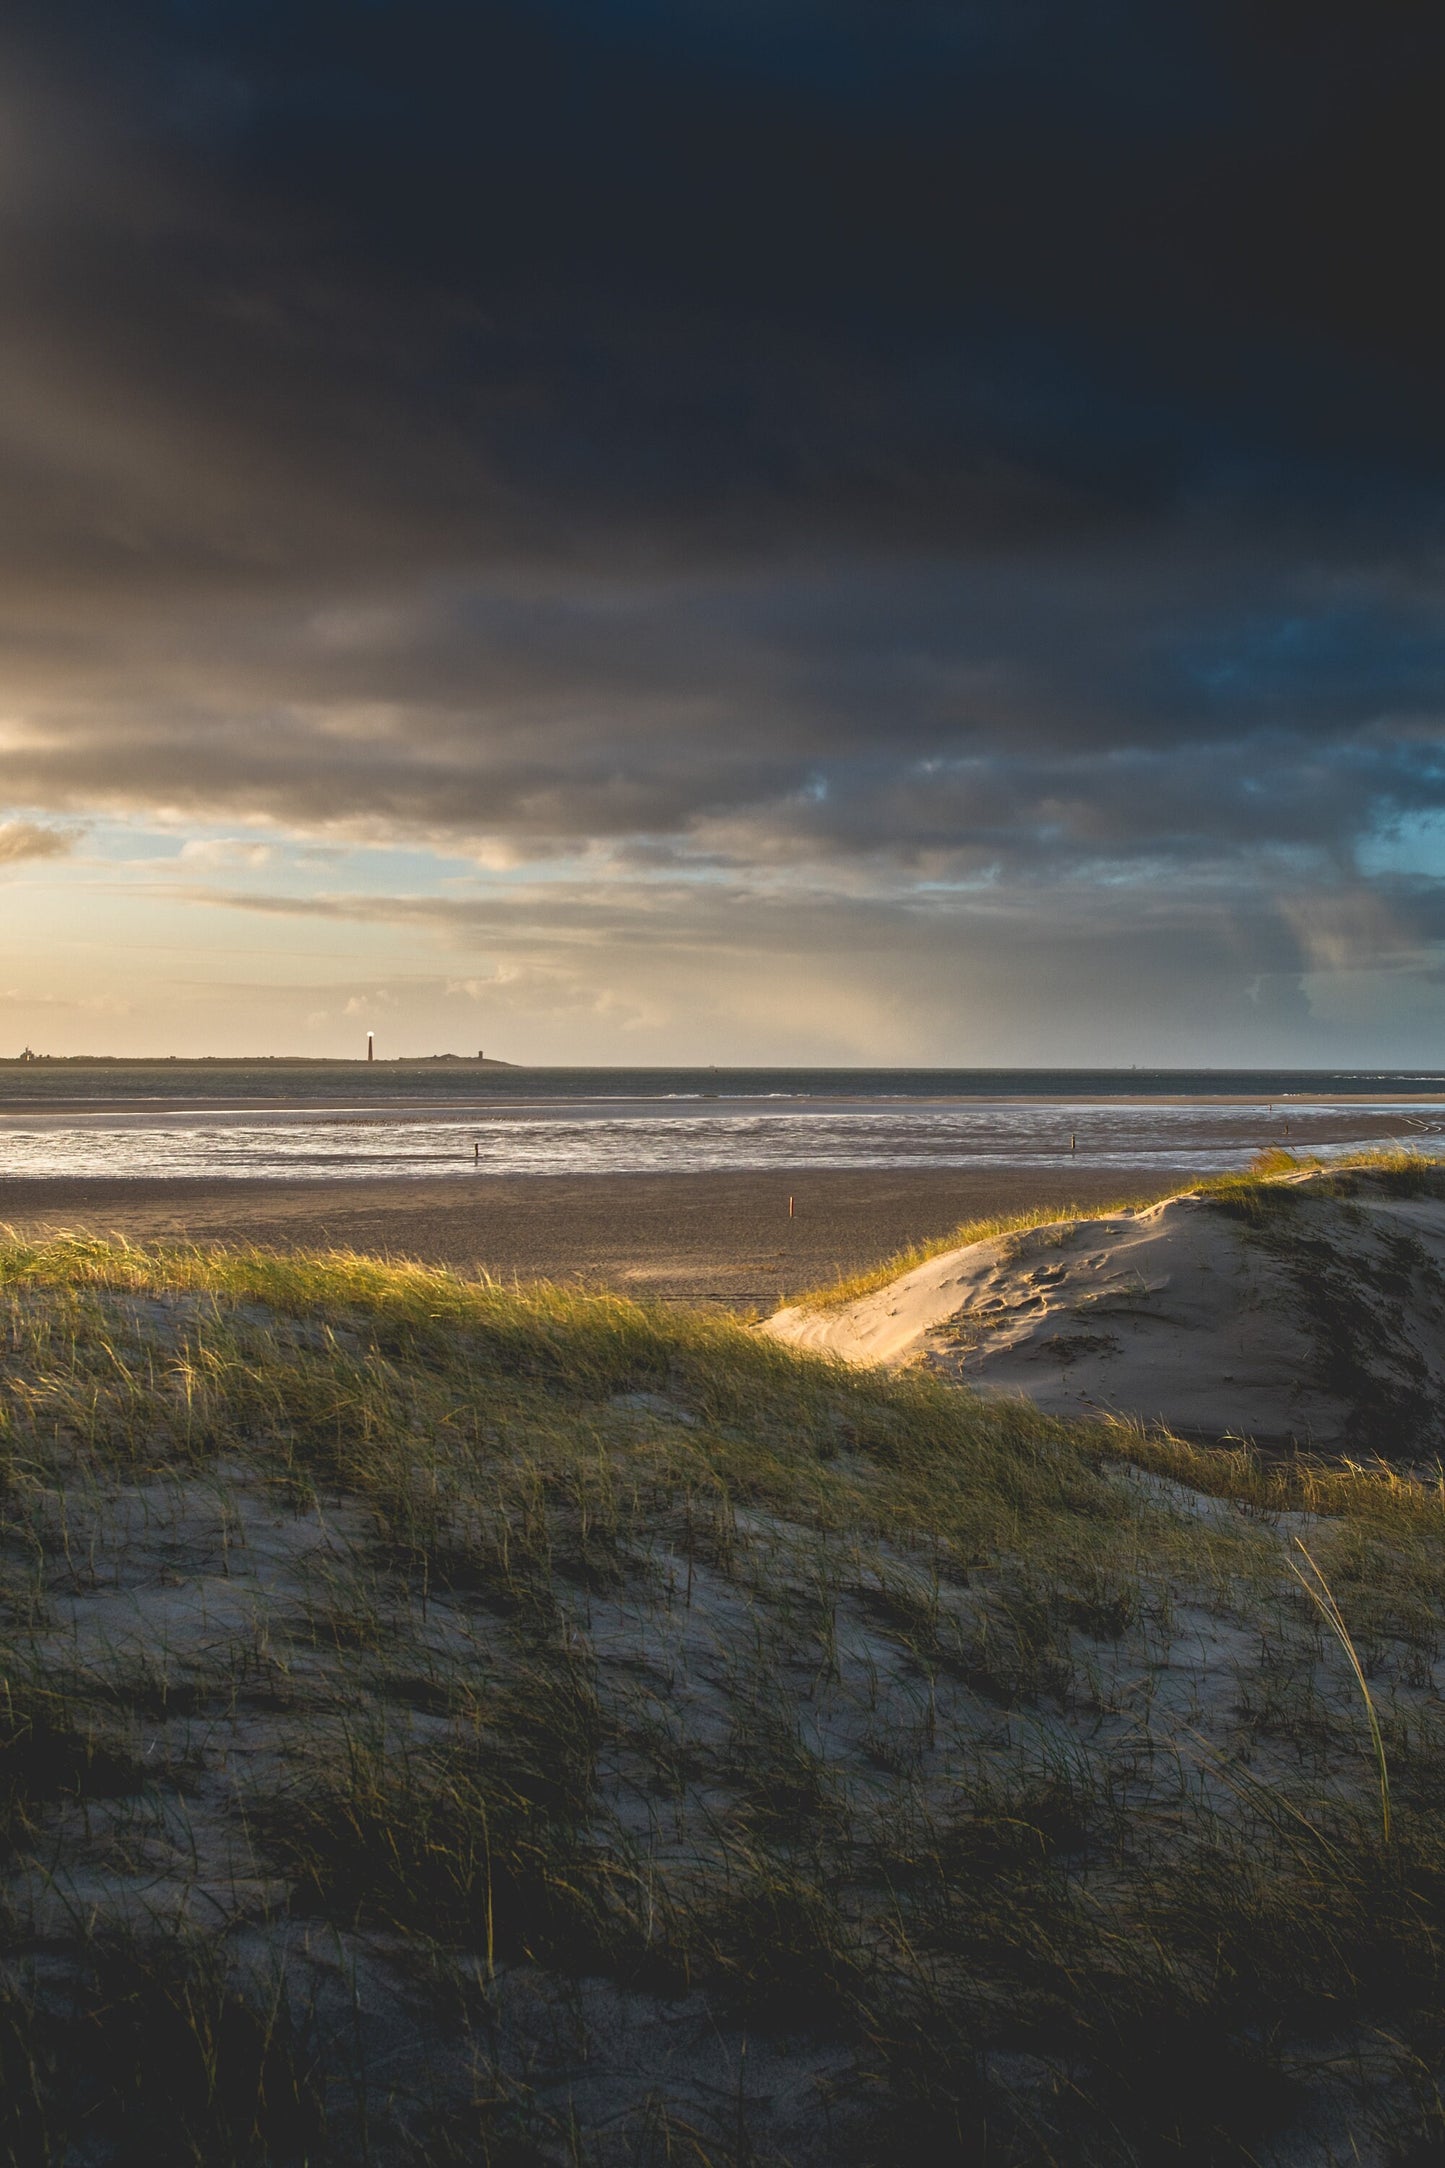 Photographic Print - Beach Dunes at Sunrise - Texel, The Netherlands